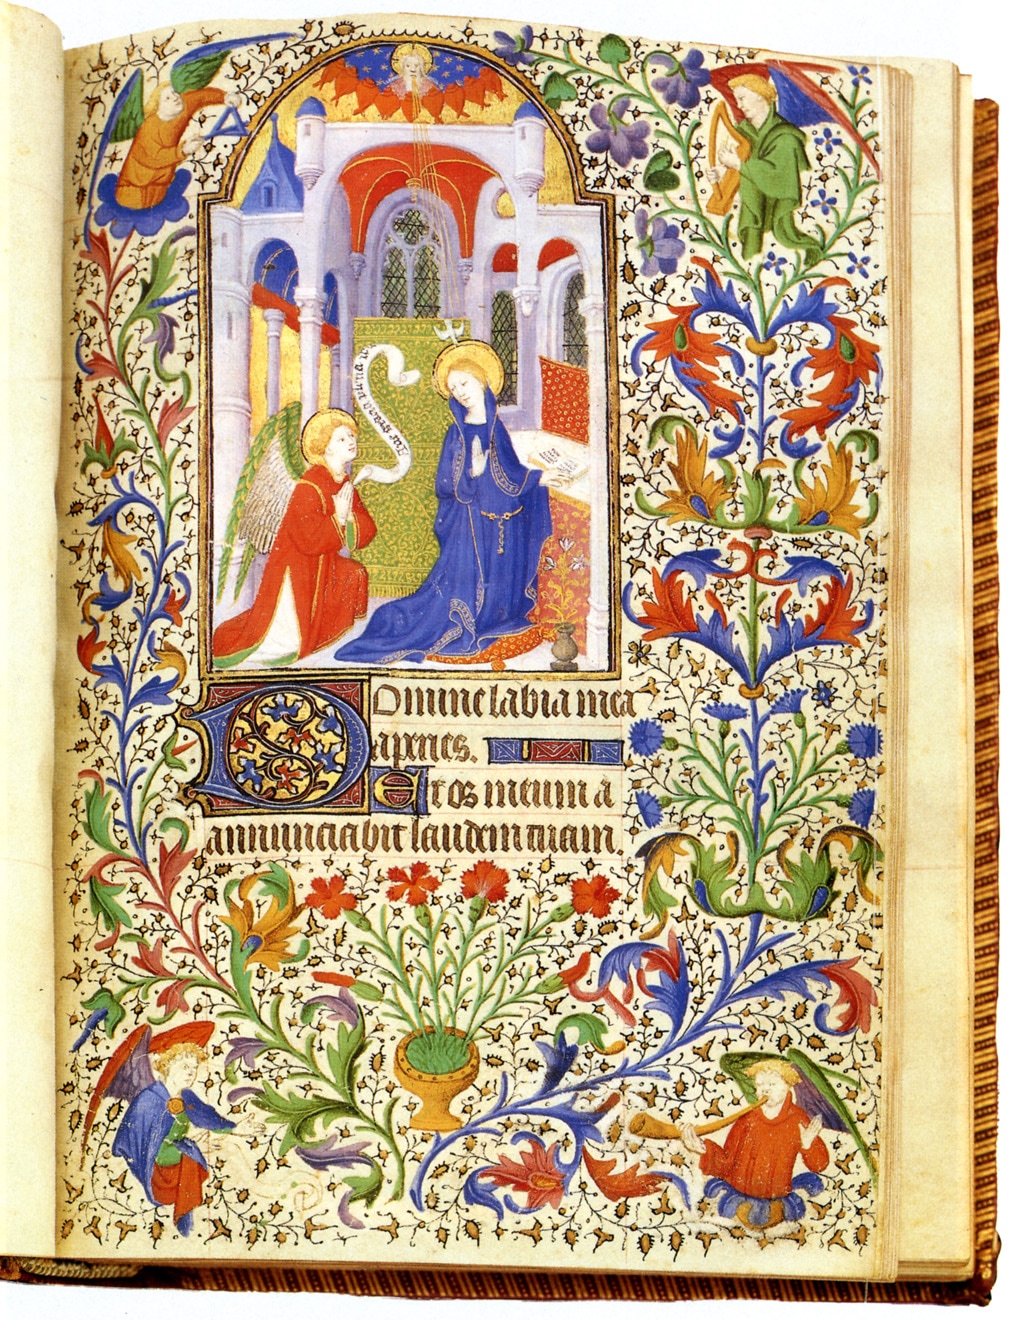 BOOK OF HOURS, in Latin and French, ILLUMINATED MANUSCRIPT 